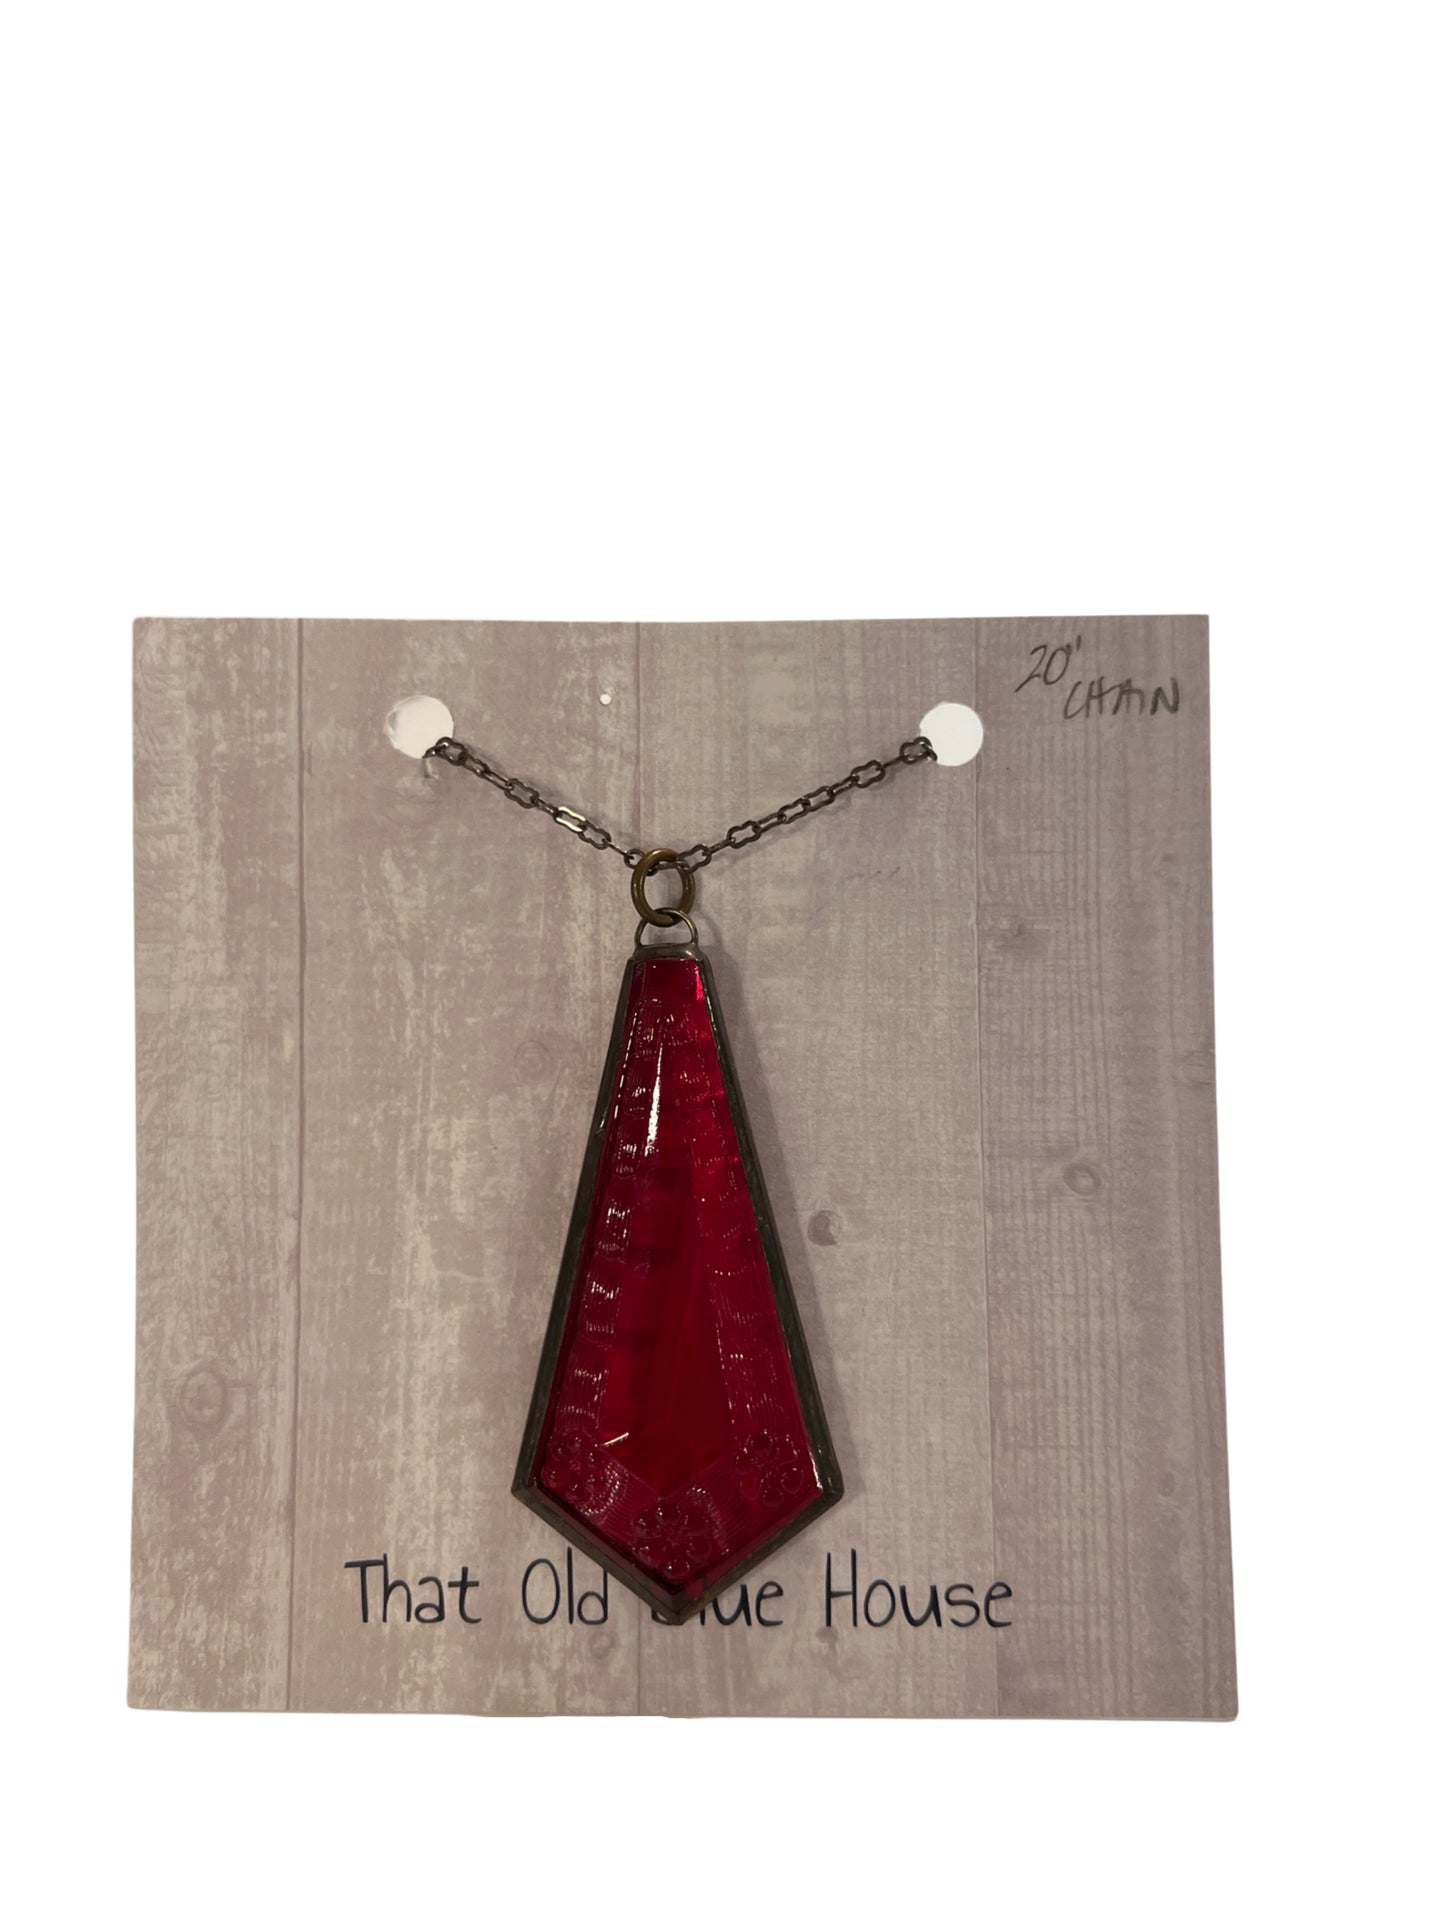 Red art deco glass necklace